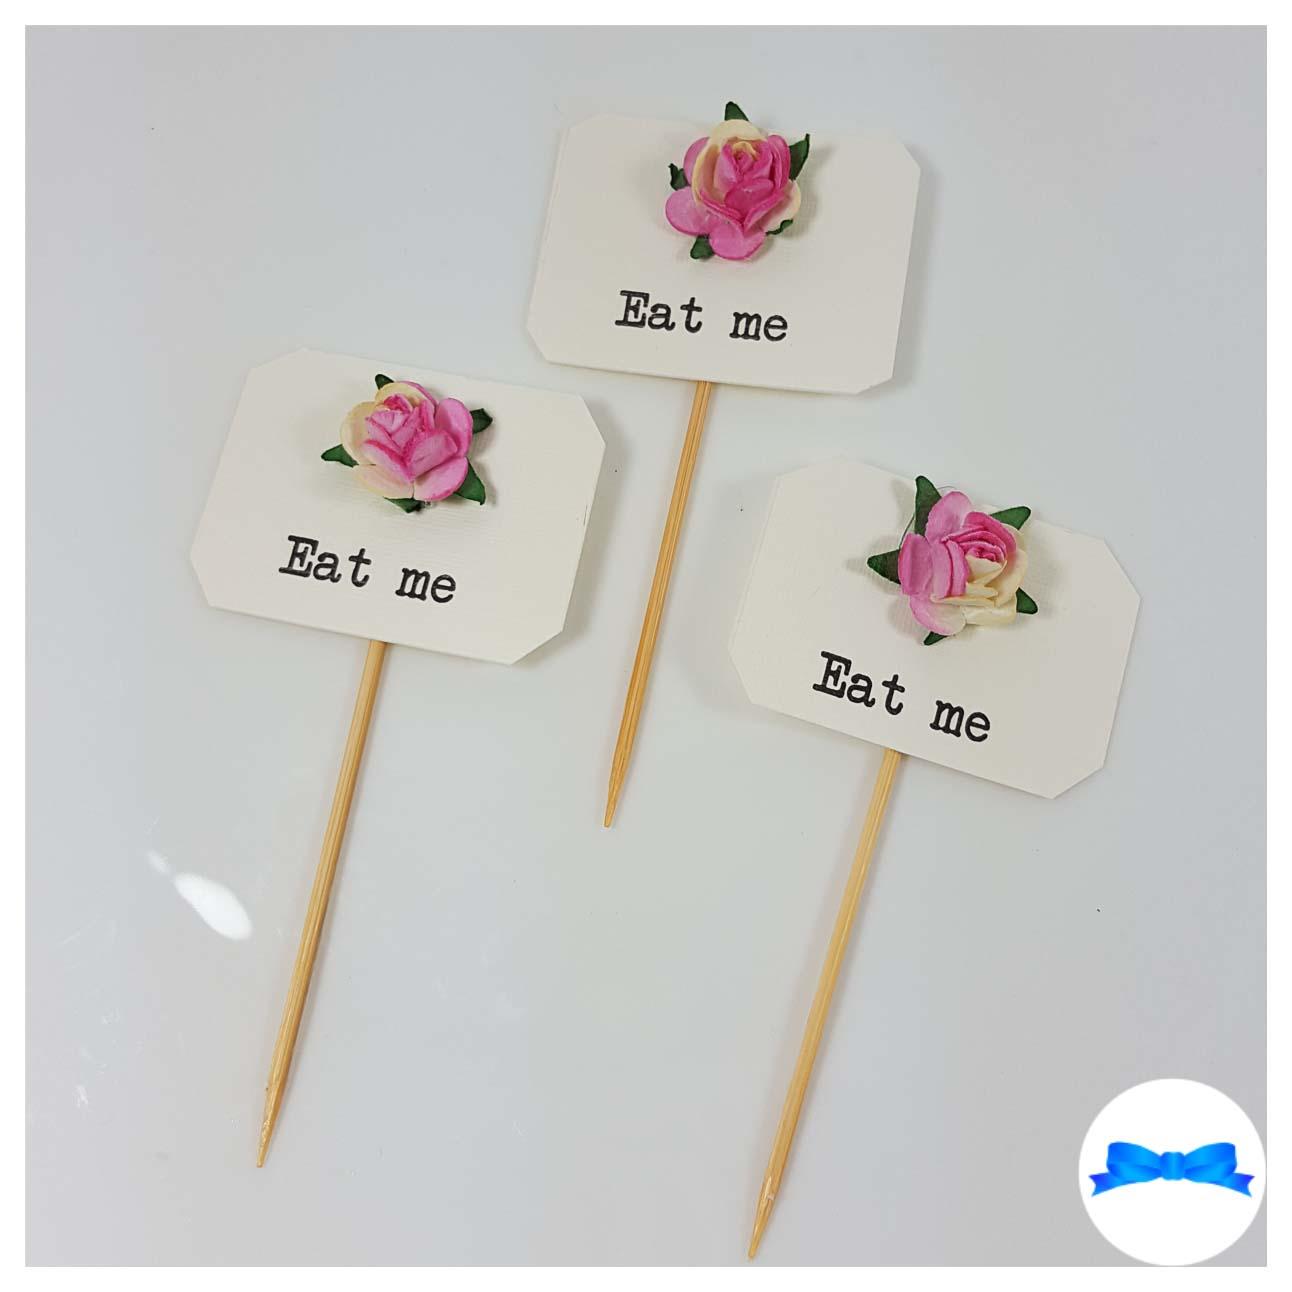 Eat me cupcake toppers